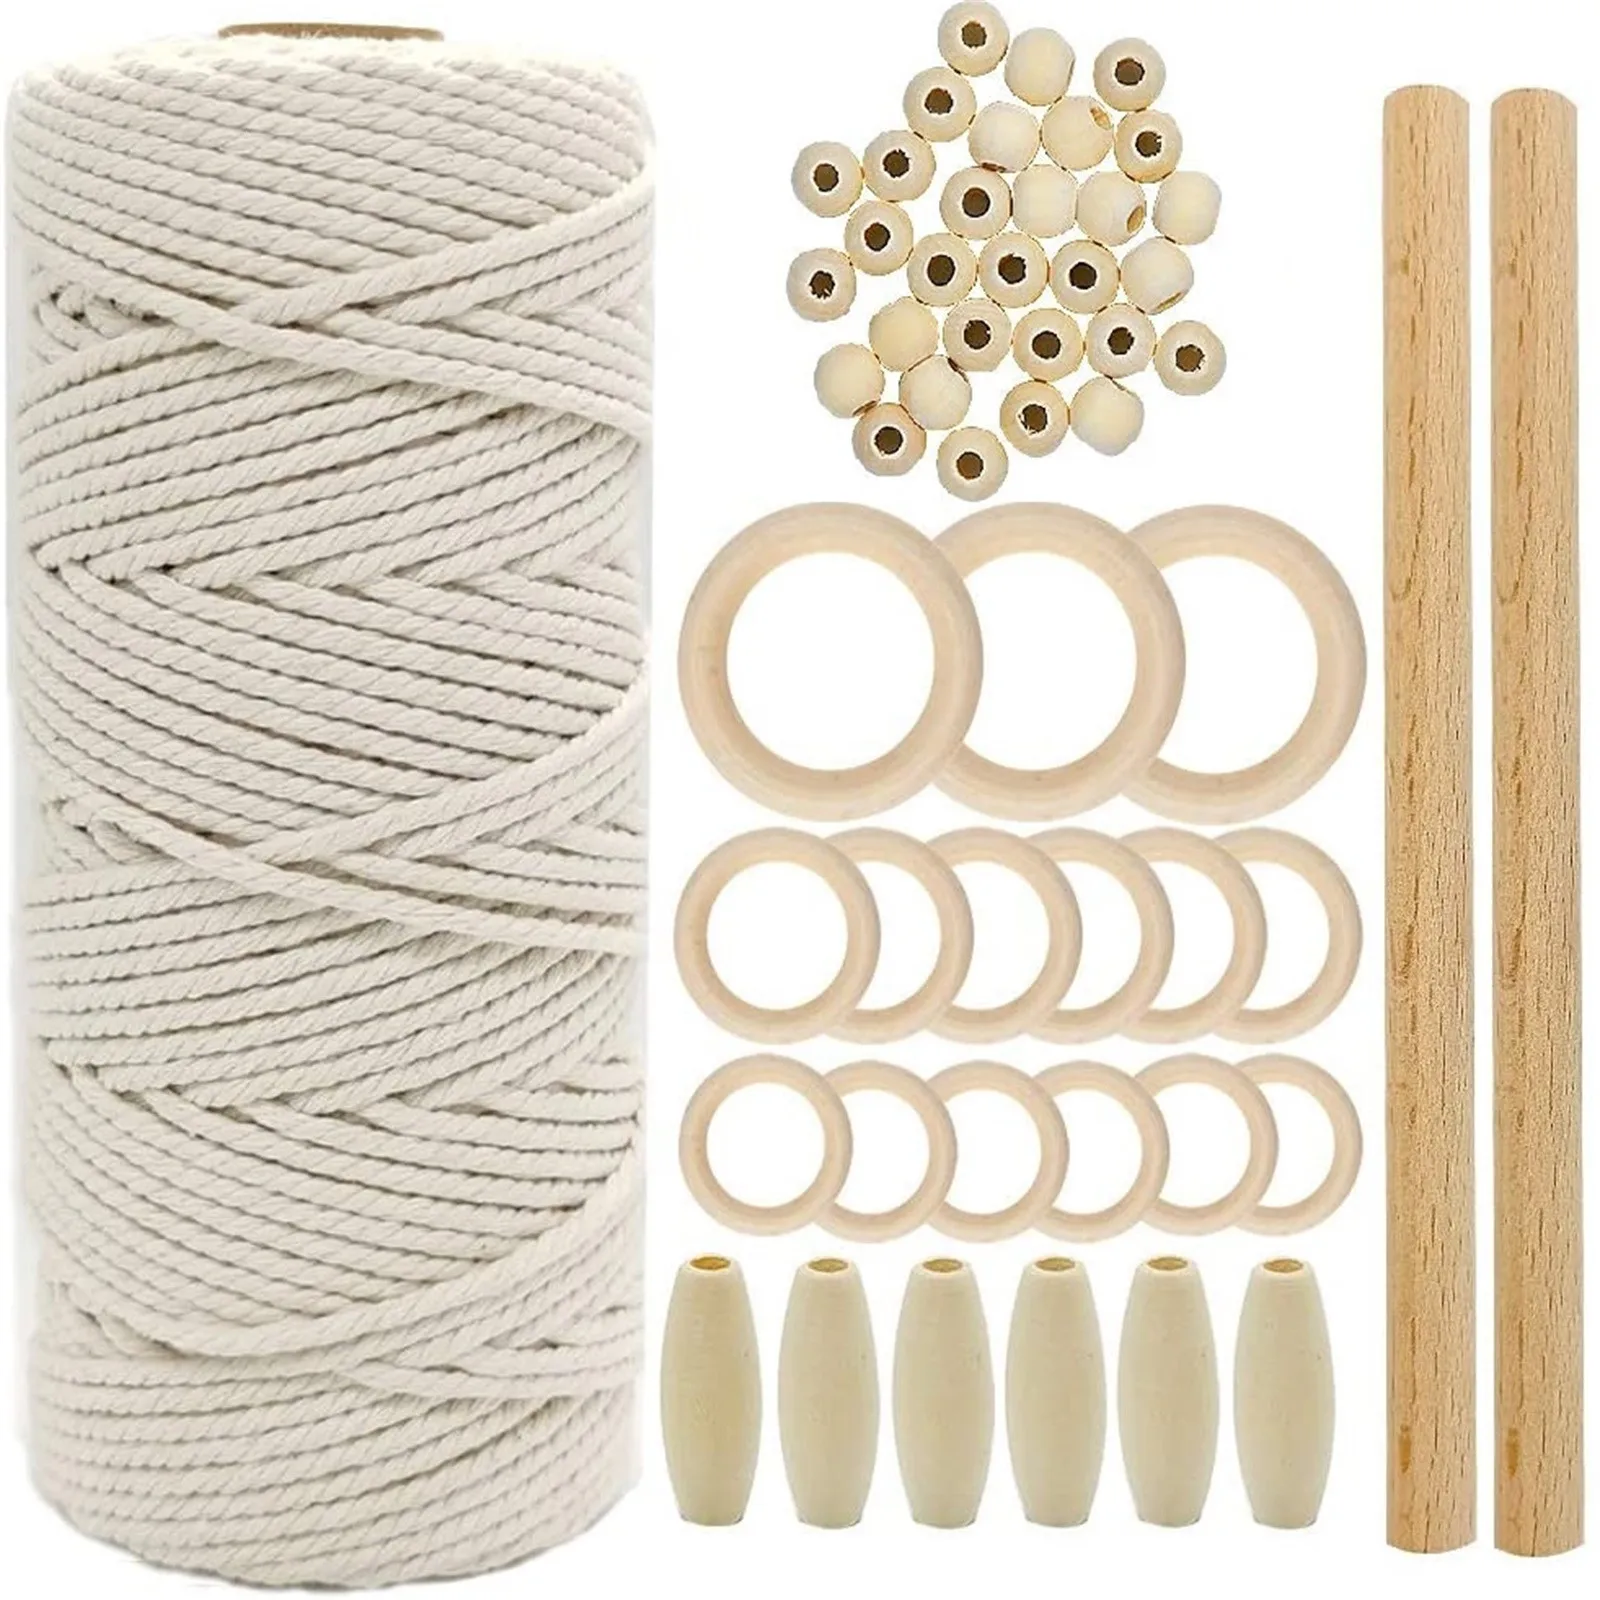 

Macrame Knotting Art Raw material Kit Cotton Yarn Cord With Wood Bead Ring Stick DIY Knitting Tapestry Coaster Bag Earrings